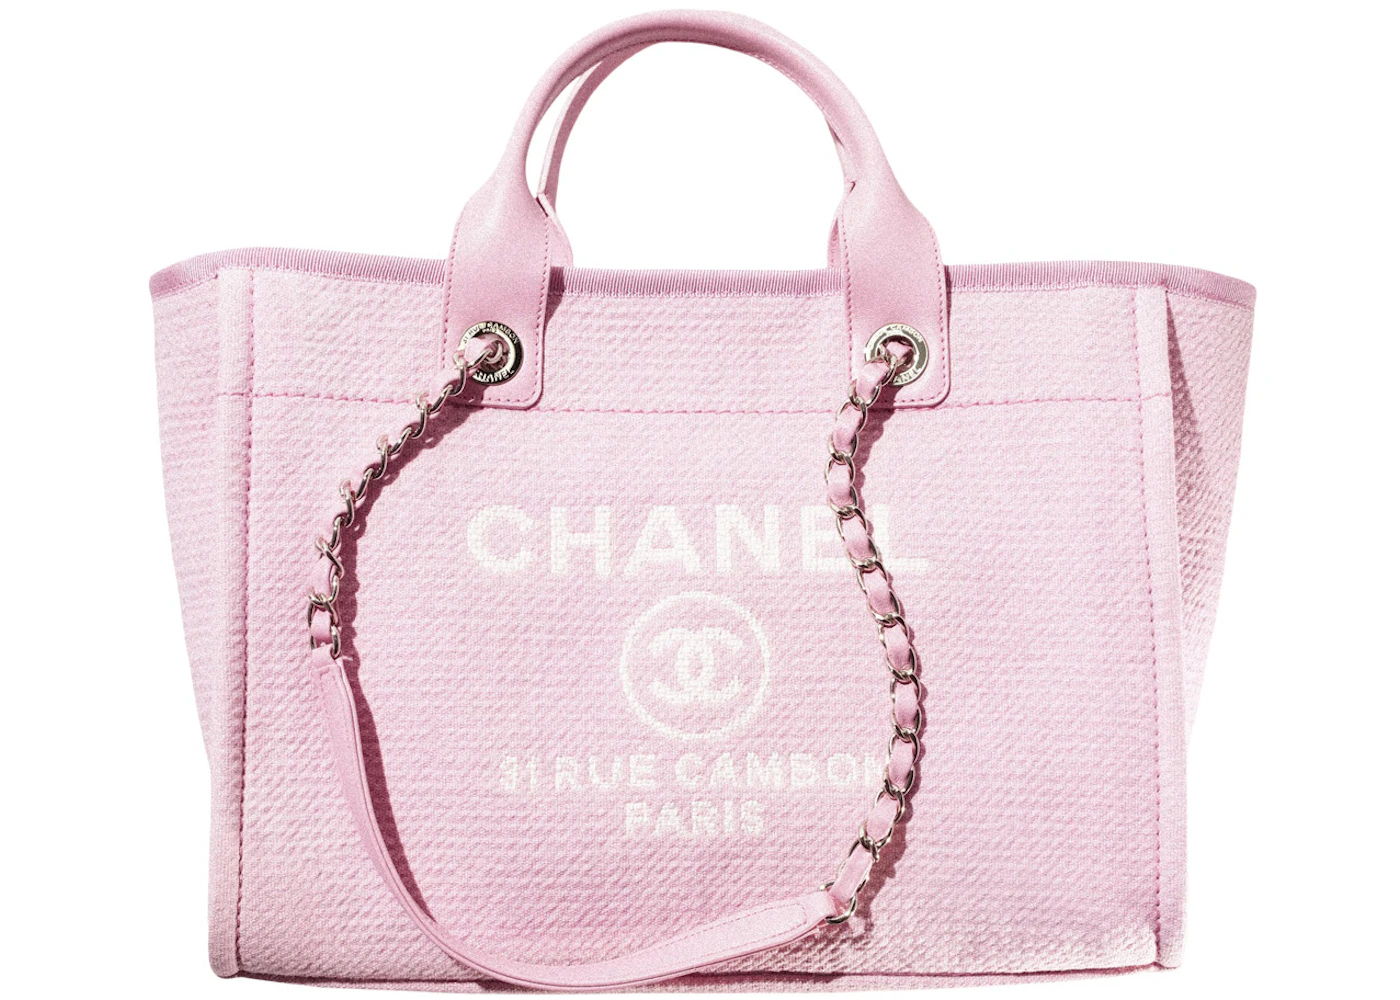 pink chanel tote black